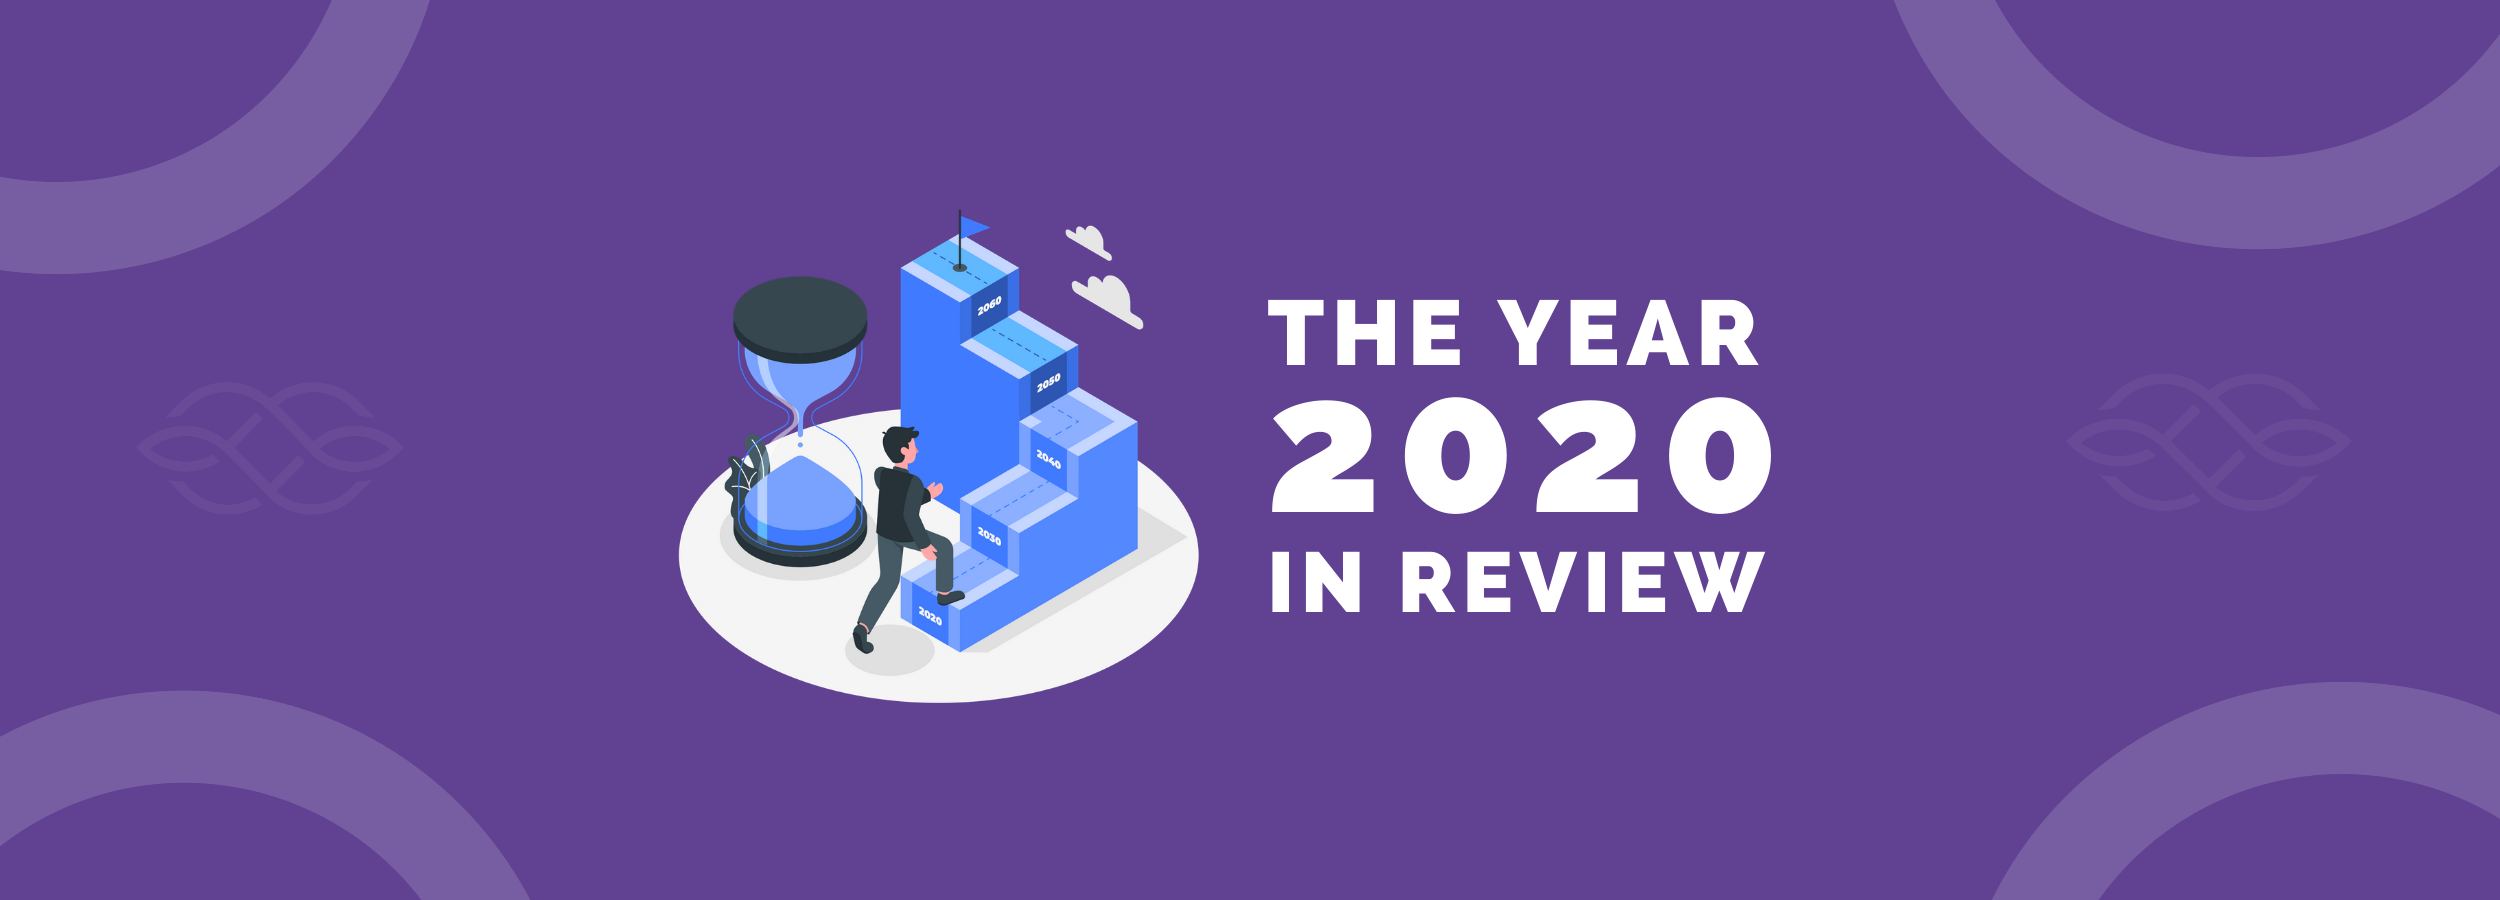 Year 2020 in Review: IAGON’s Significant Headway With A Clear Vision For Becoming A Market Gamechanger